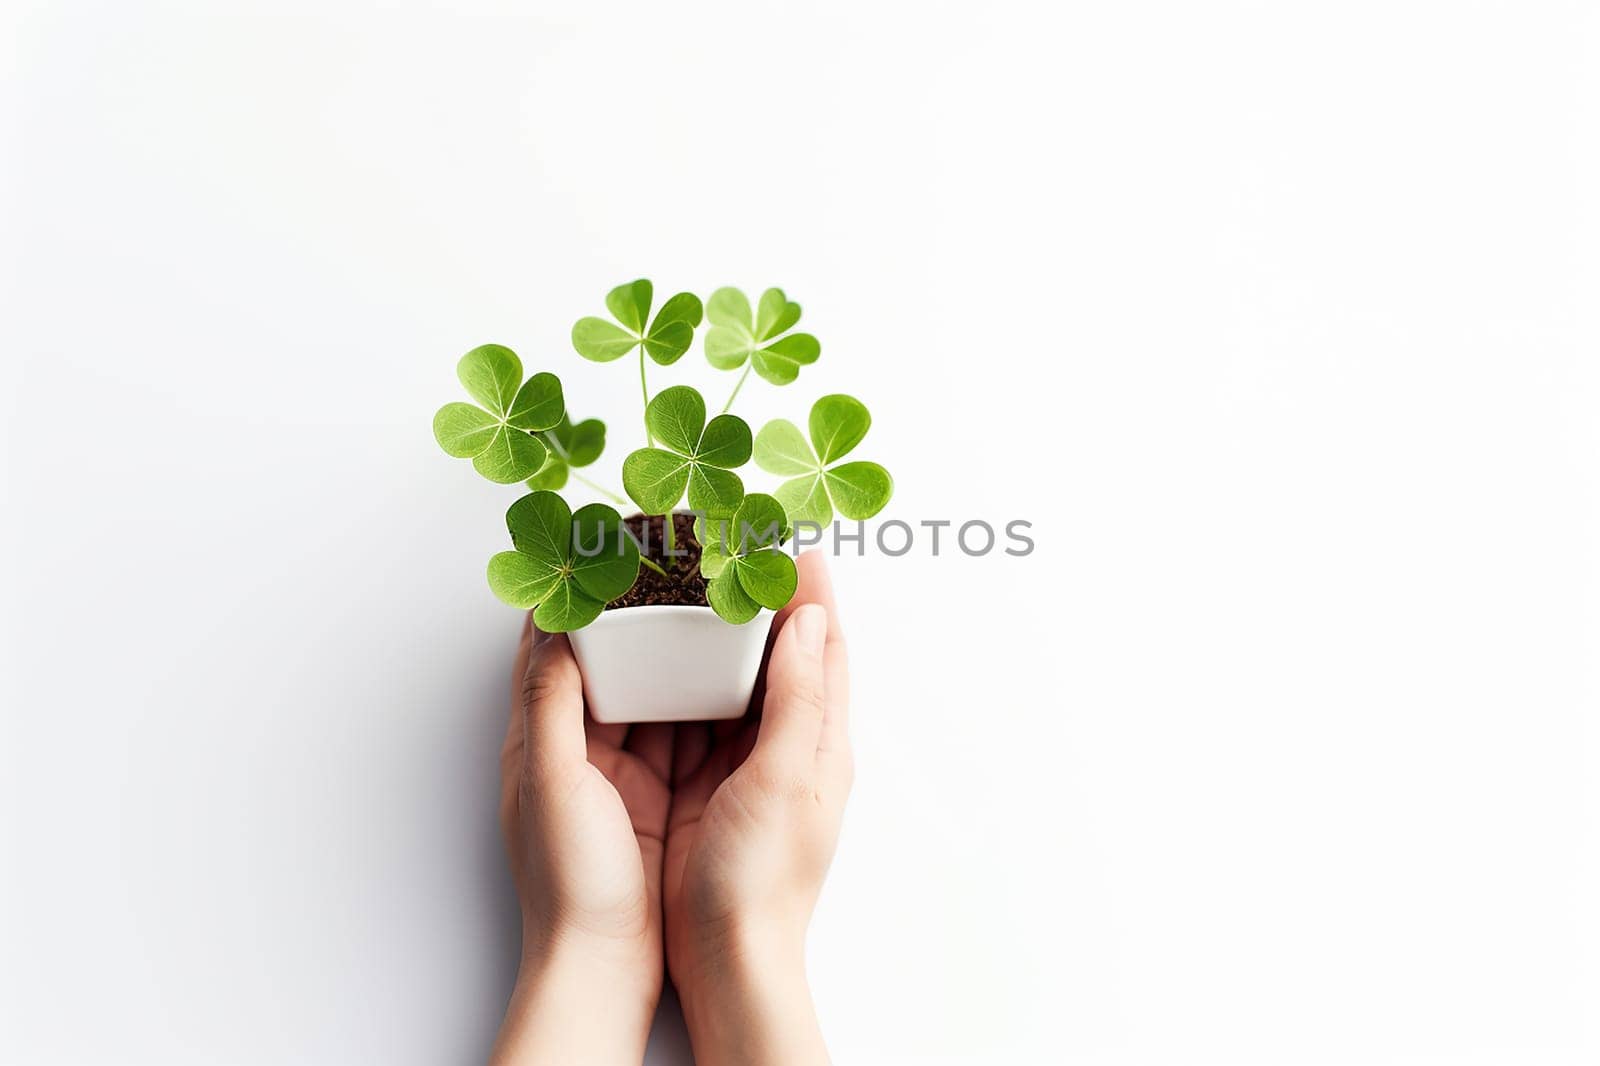 Hands holding a white pot with growing clover plants isolated on white background